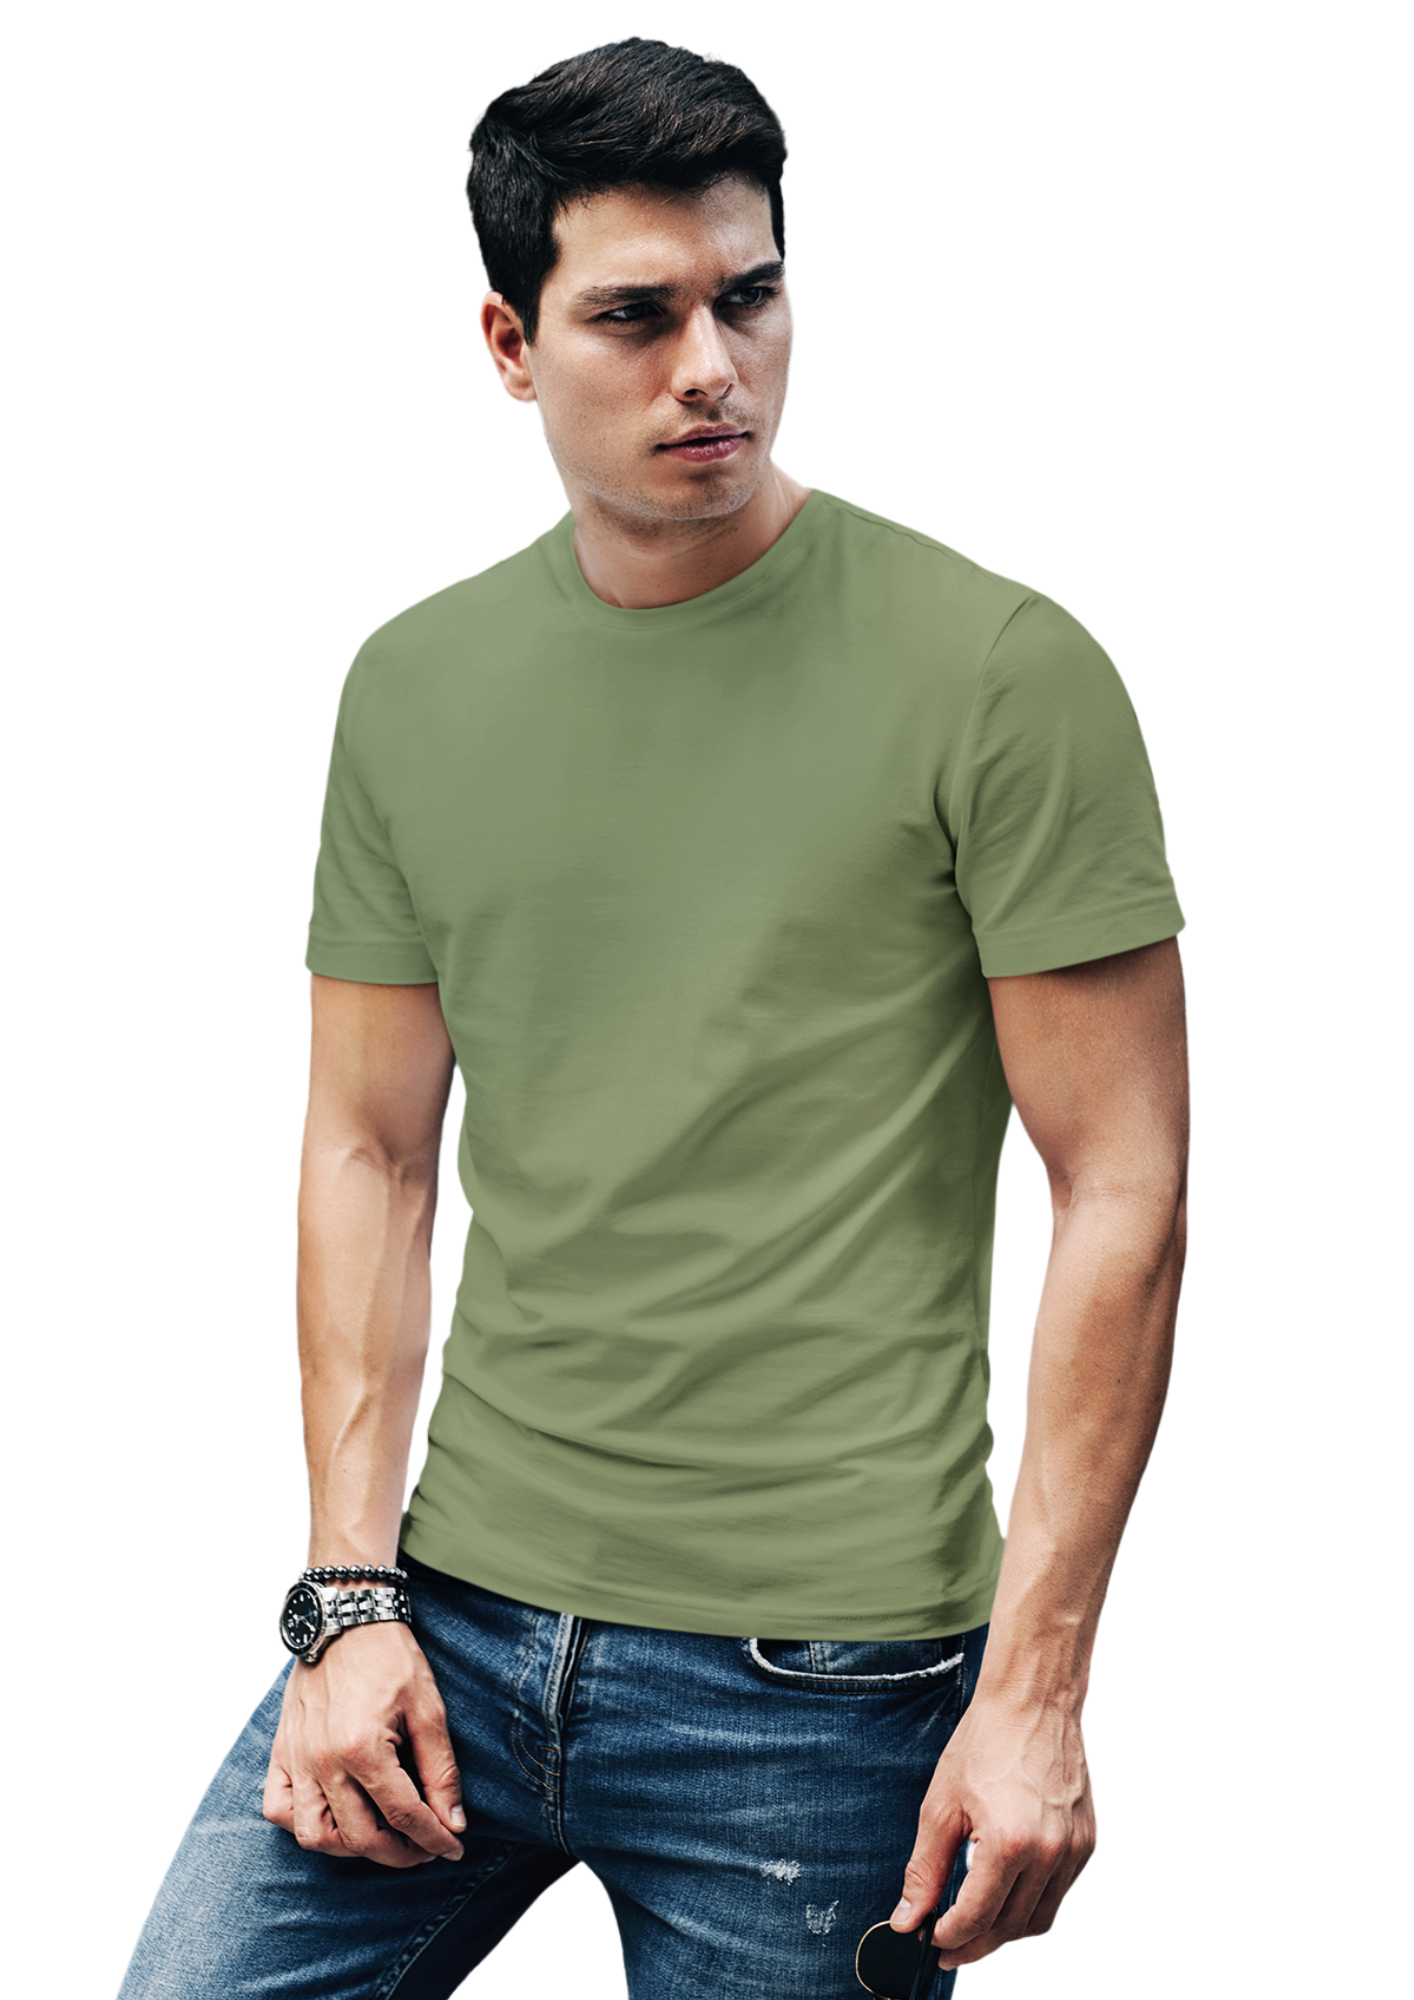 100% Compacted Combed Cotton Pine, Olive, Navy 3 T-shirts